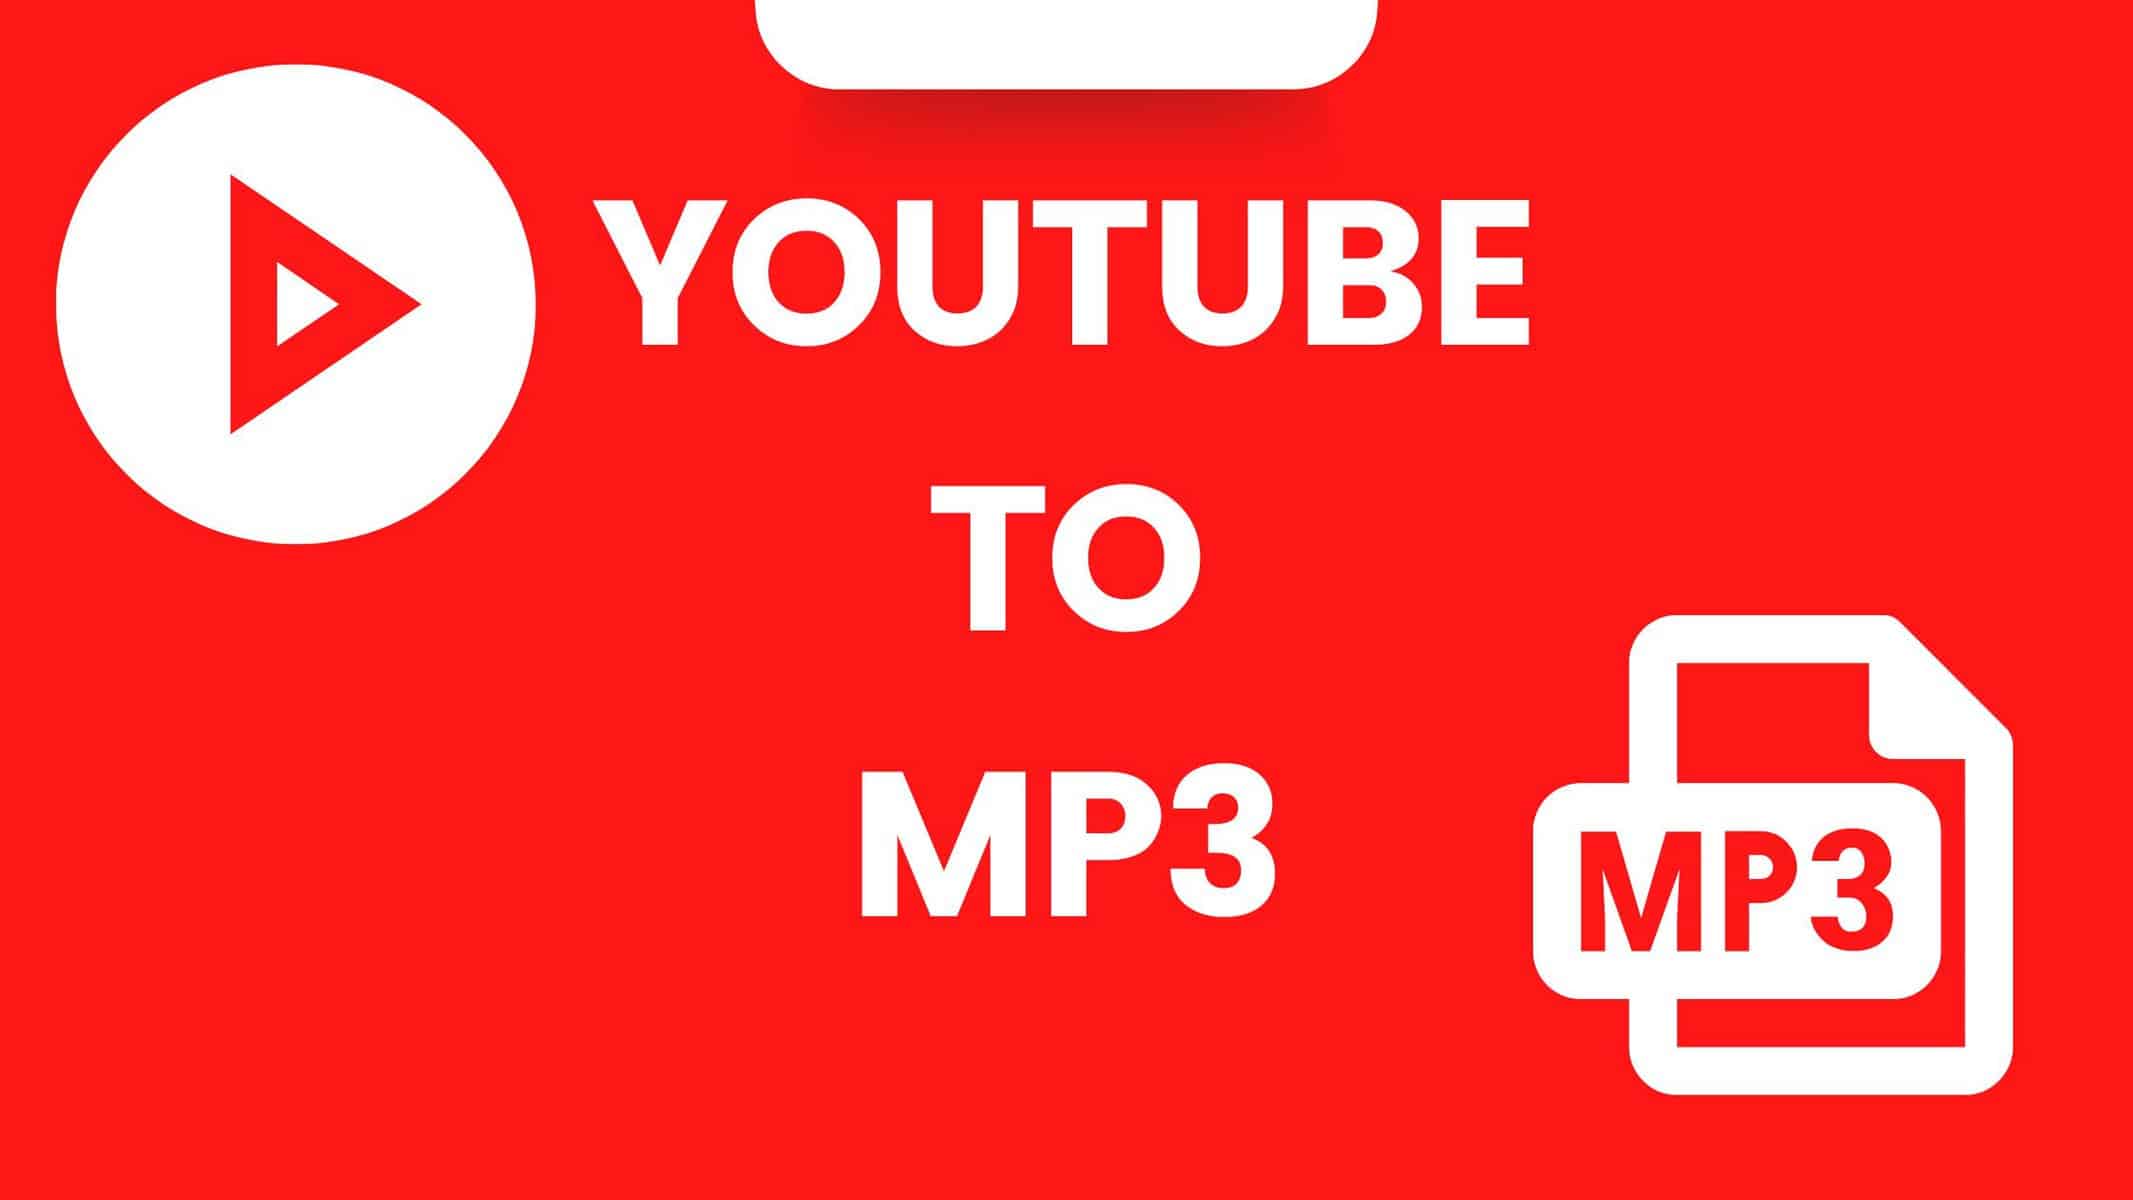 Best Way to Convert Youtube To Mp3 - Step by Step Guide